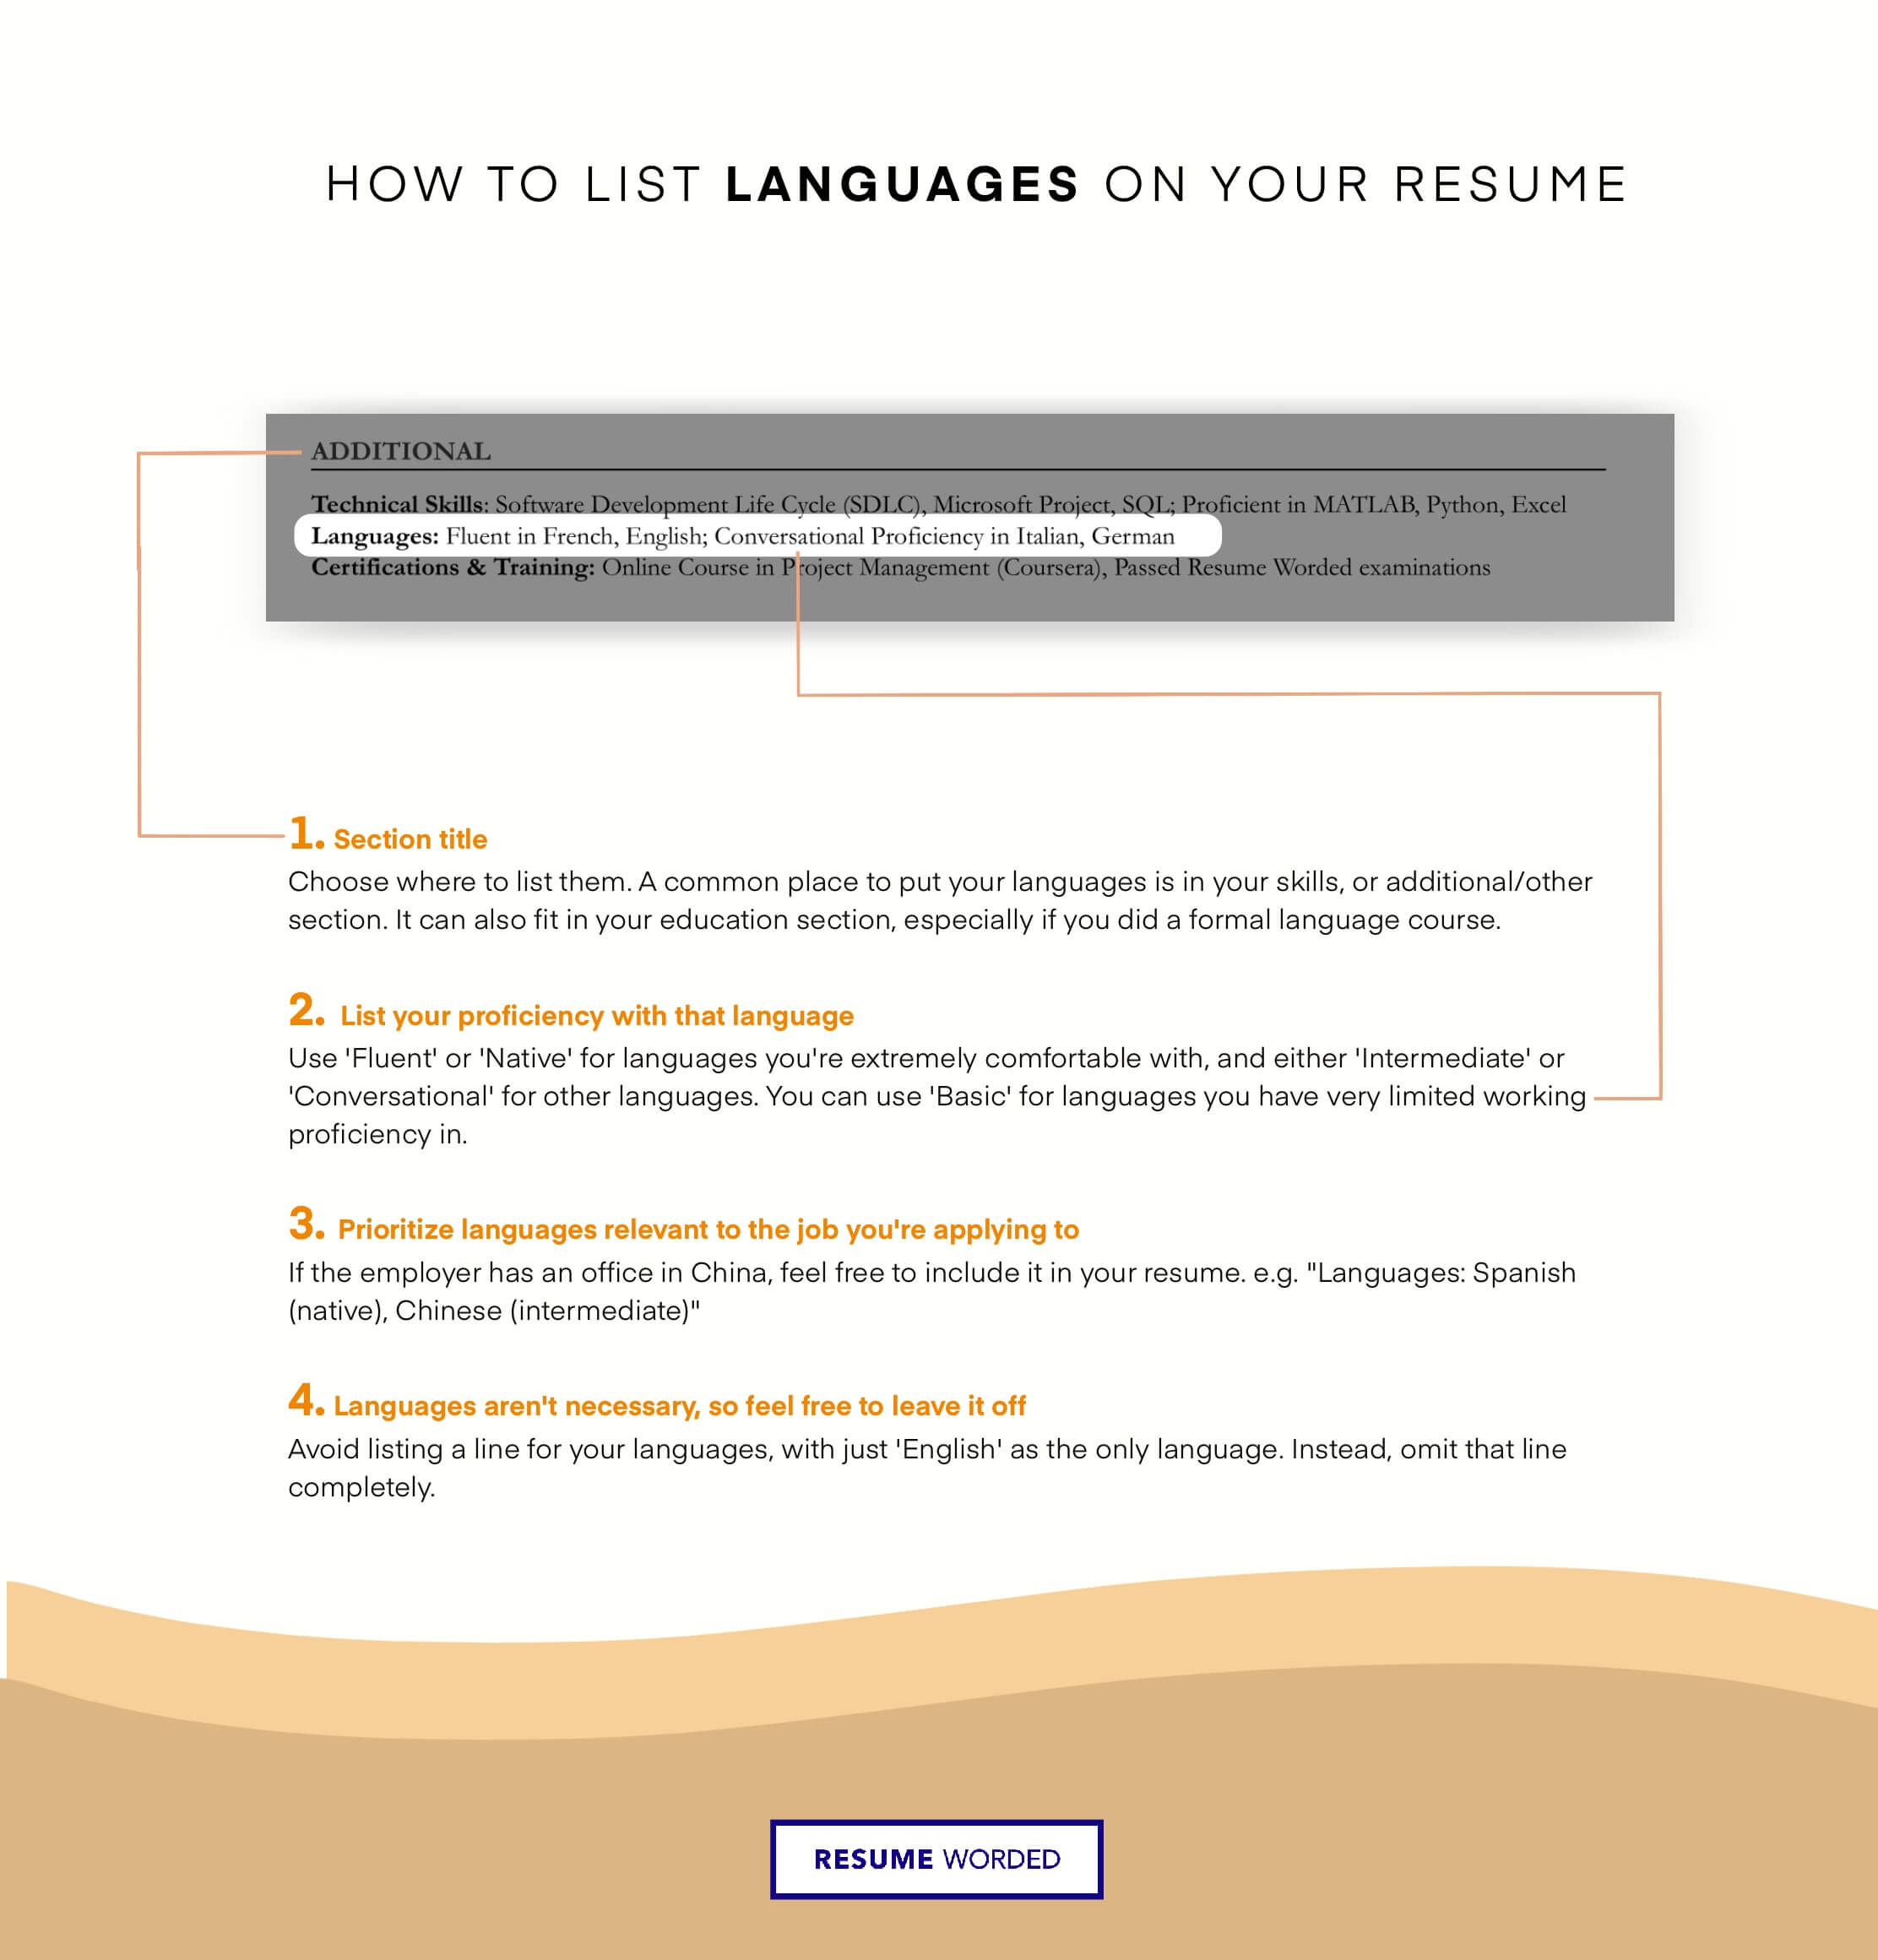 Include any language you know. - Senior Art Director Resume